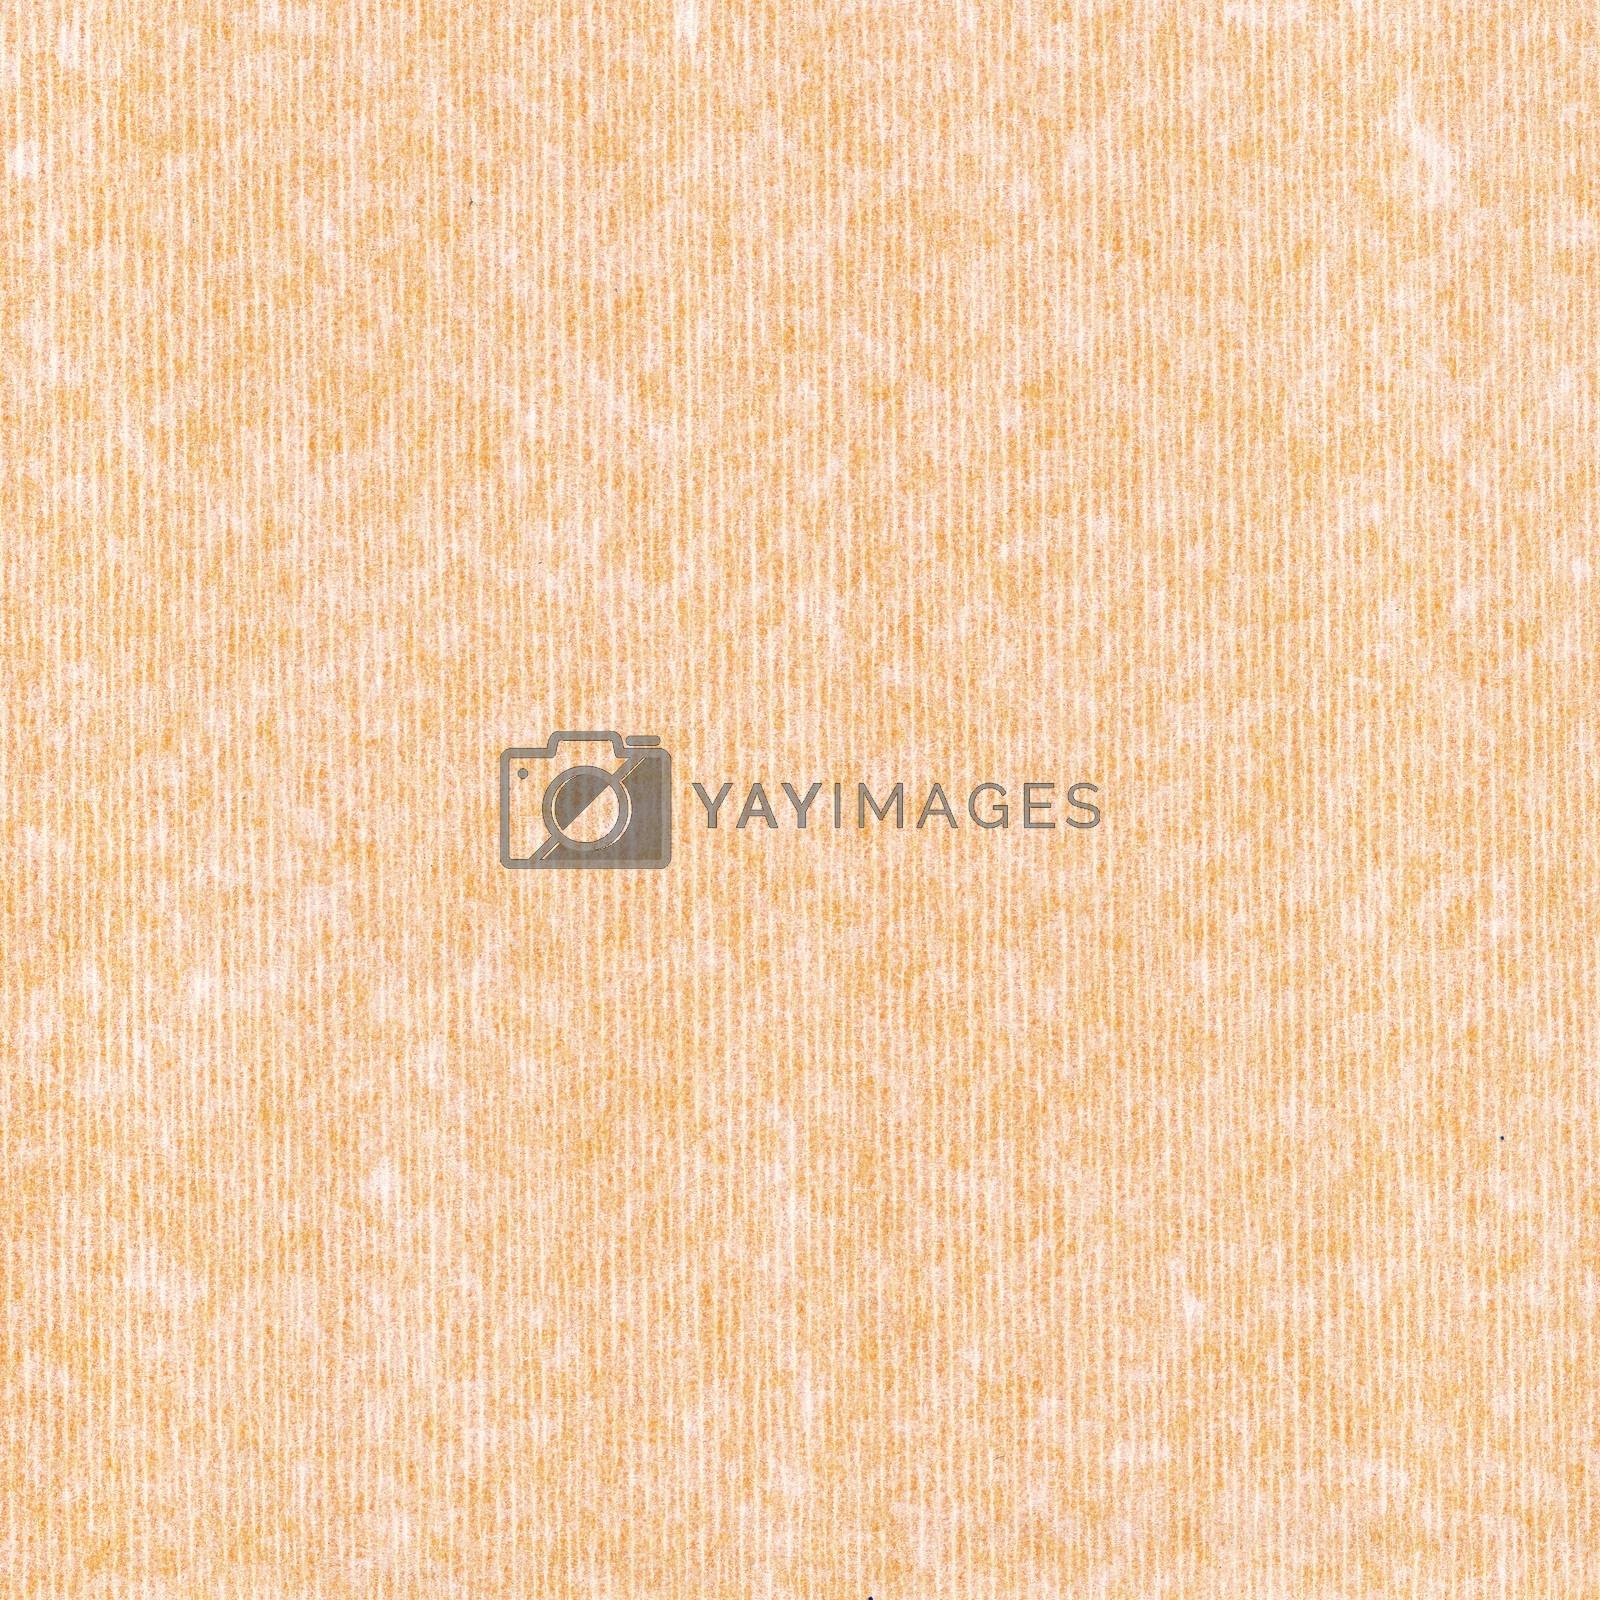 Old textured blank background for design and scrapbooking